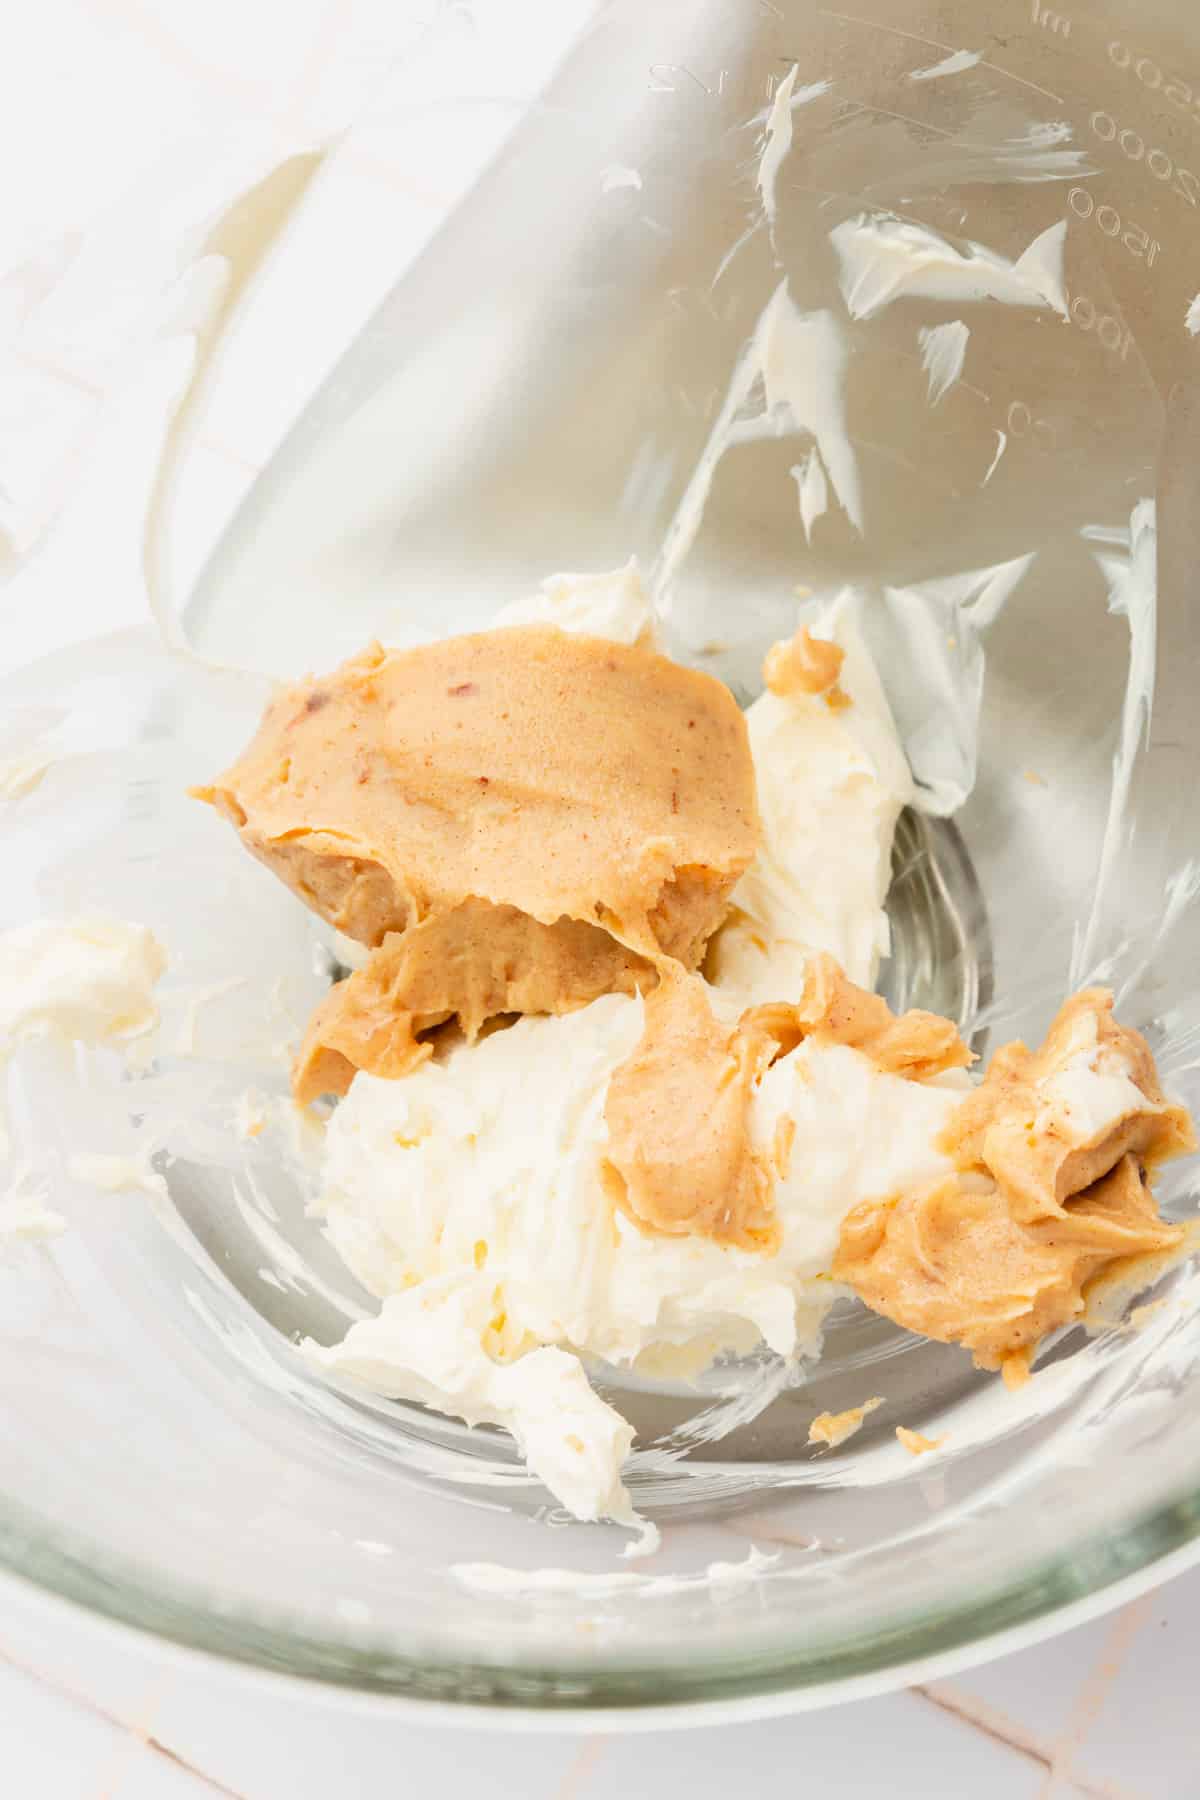 A glass mixing bowl with cream cheese and solidified browned butter in it.